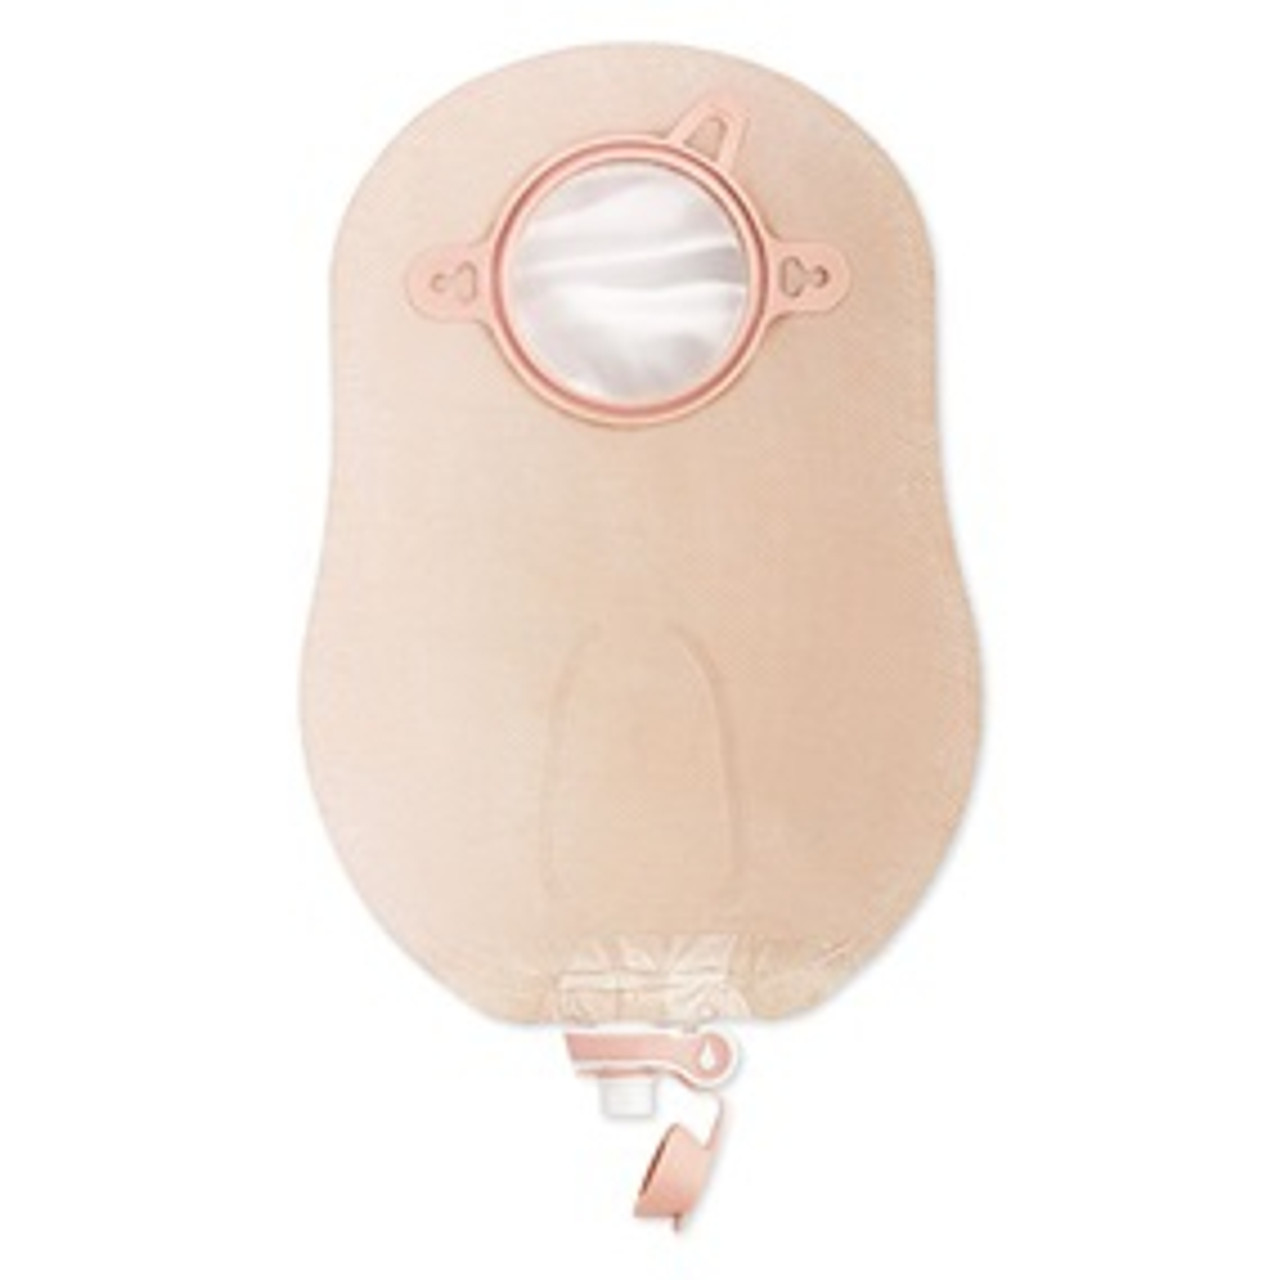 NEW IMAGE Urostomy Pouch W/ MULTI-CHAMBER, 2 3/4" (70MM), 9", Transparent BX/10 (HOL-18904)